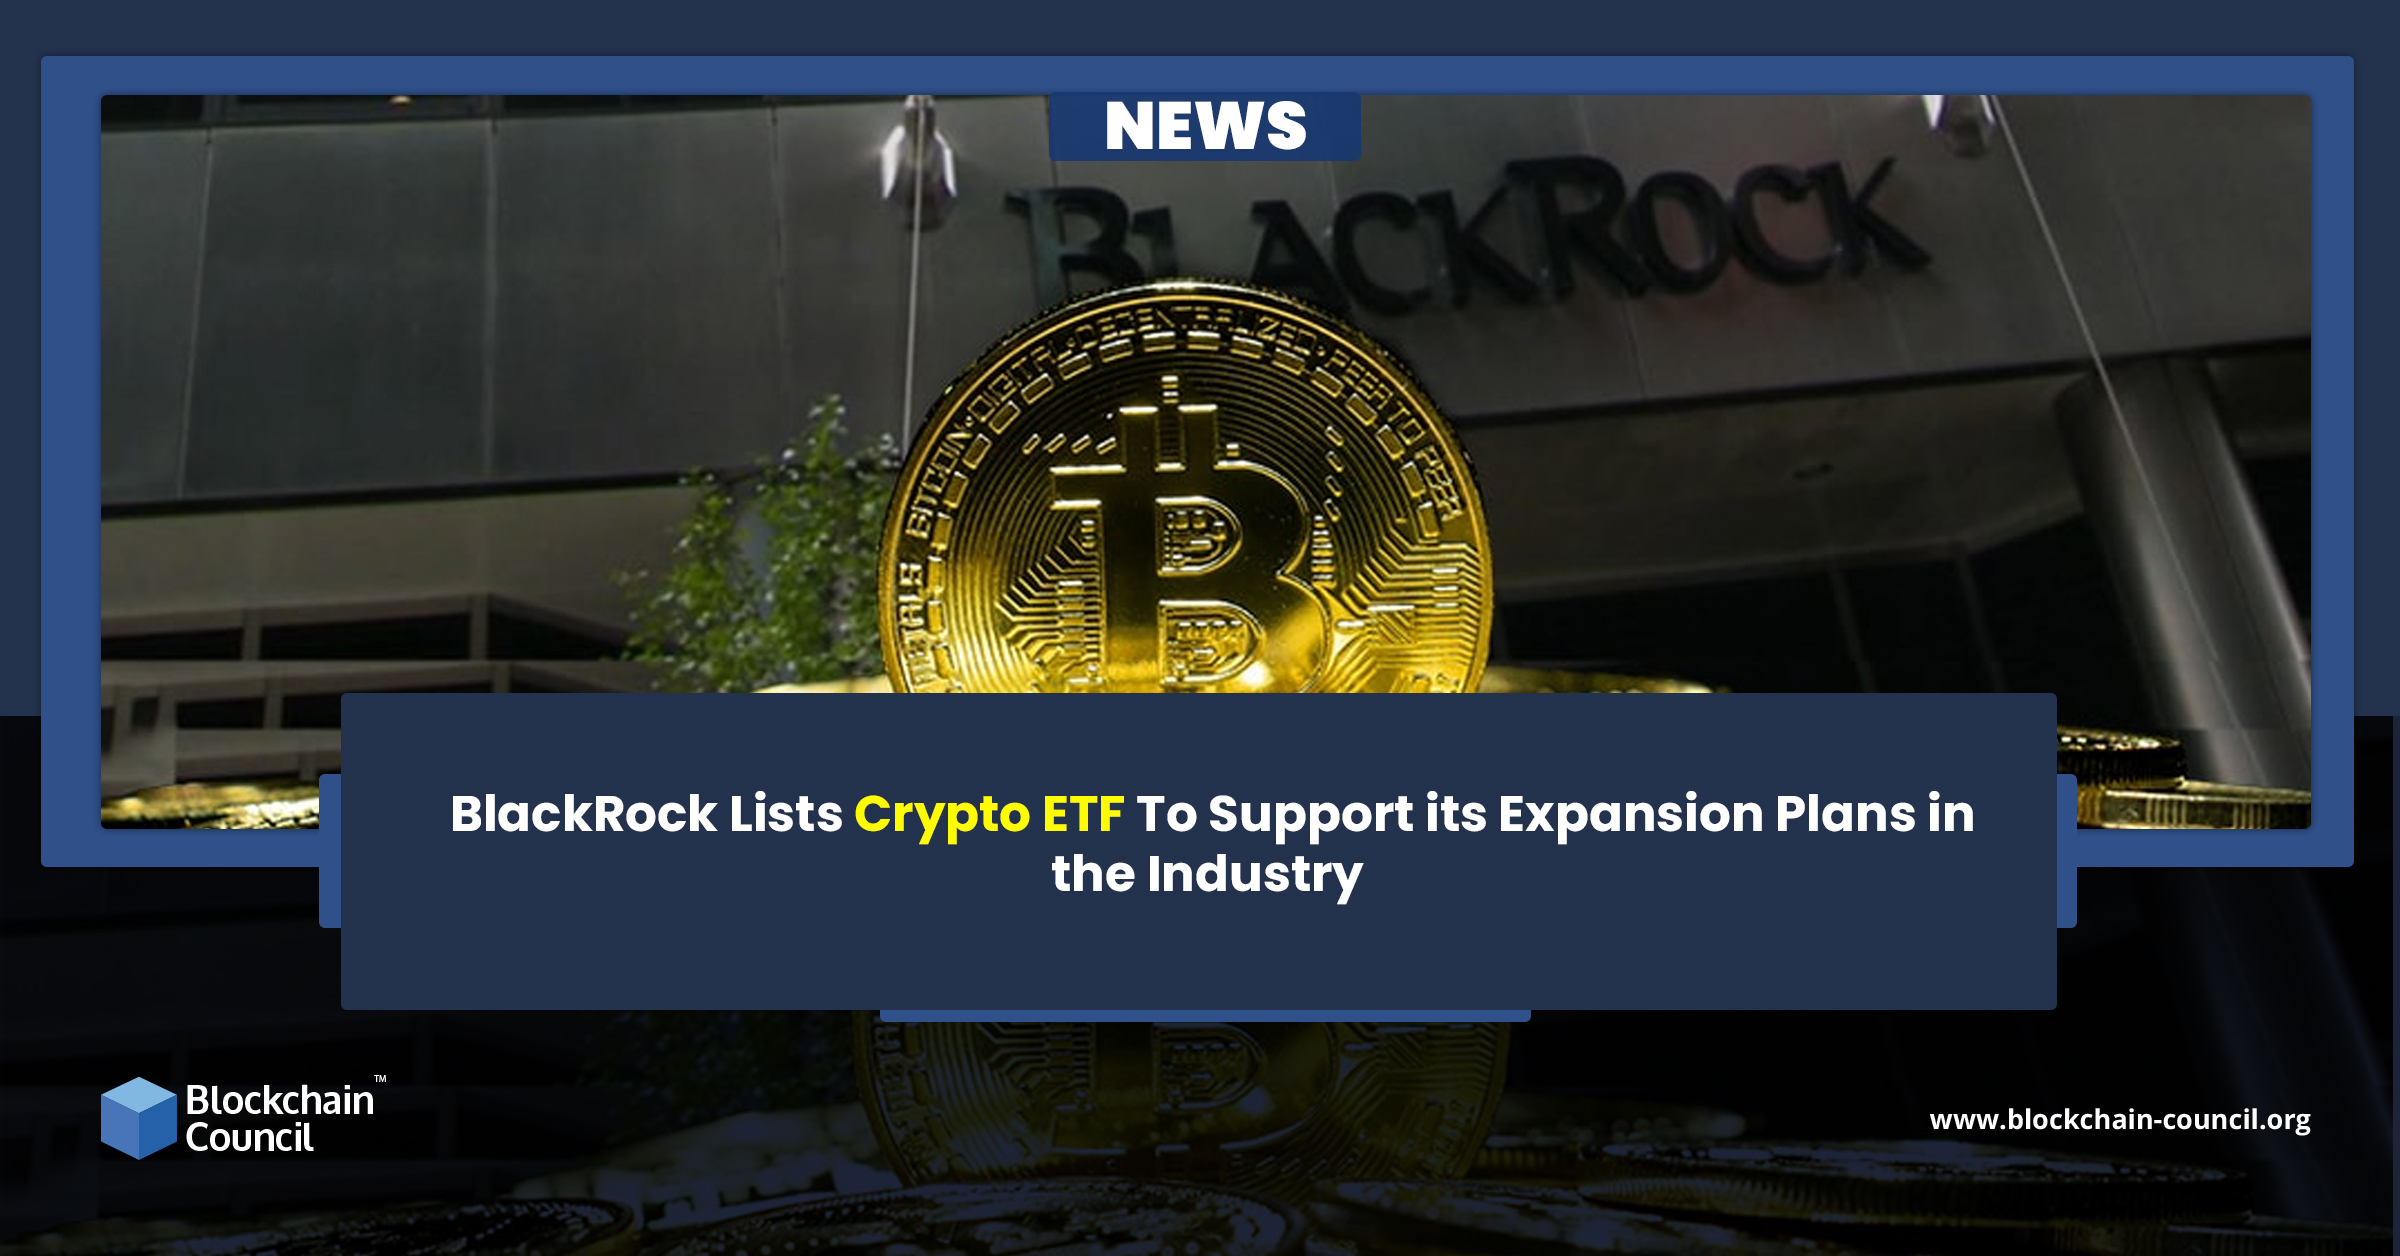 BlackRock Lists Crypto ETF To Support its Expansion Plans in the Industry